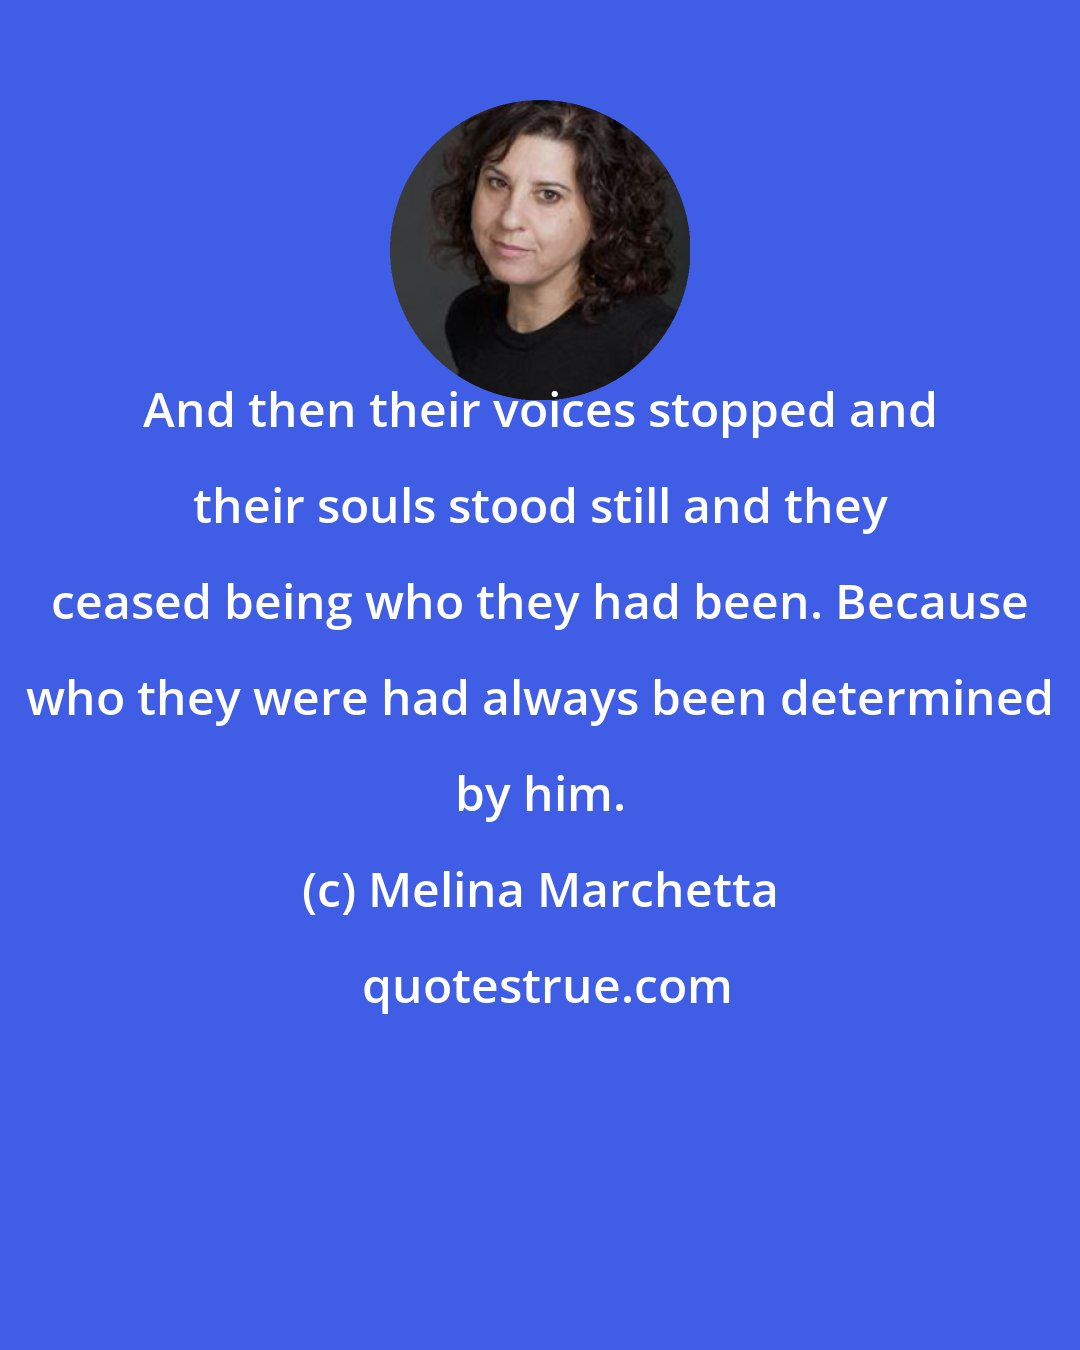 Melina Marchetta: And then their voices stopped and their souls stood still and they ceased being who they had been. Because who they were had always been determined by him.